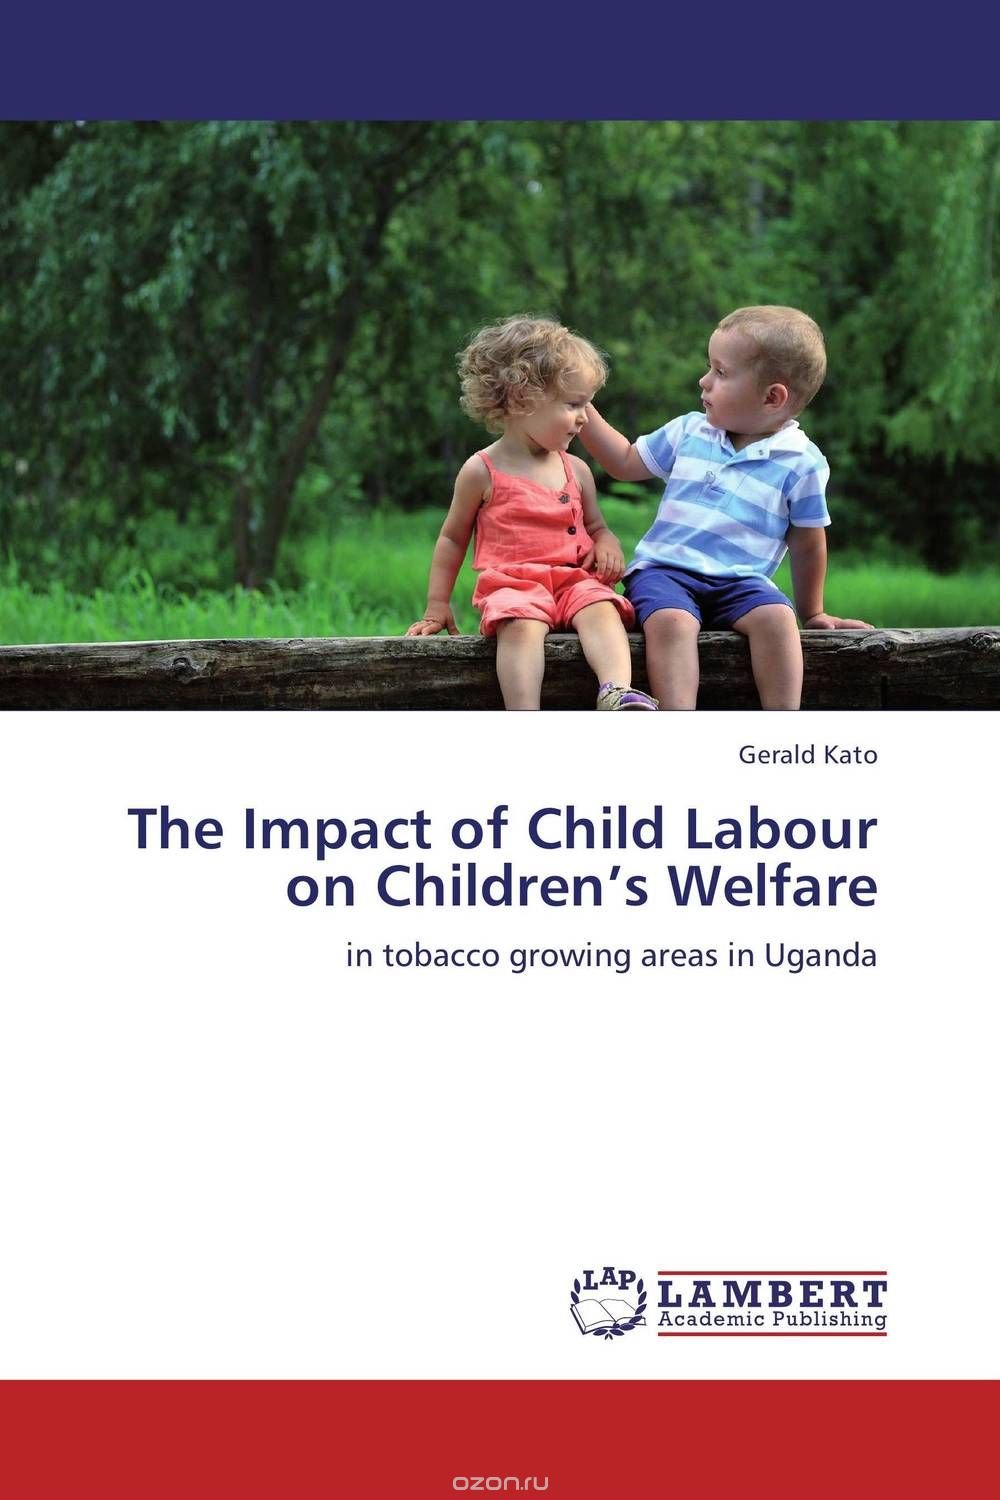 The Impact of Child Labour on Children’s Welfare